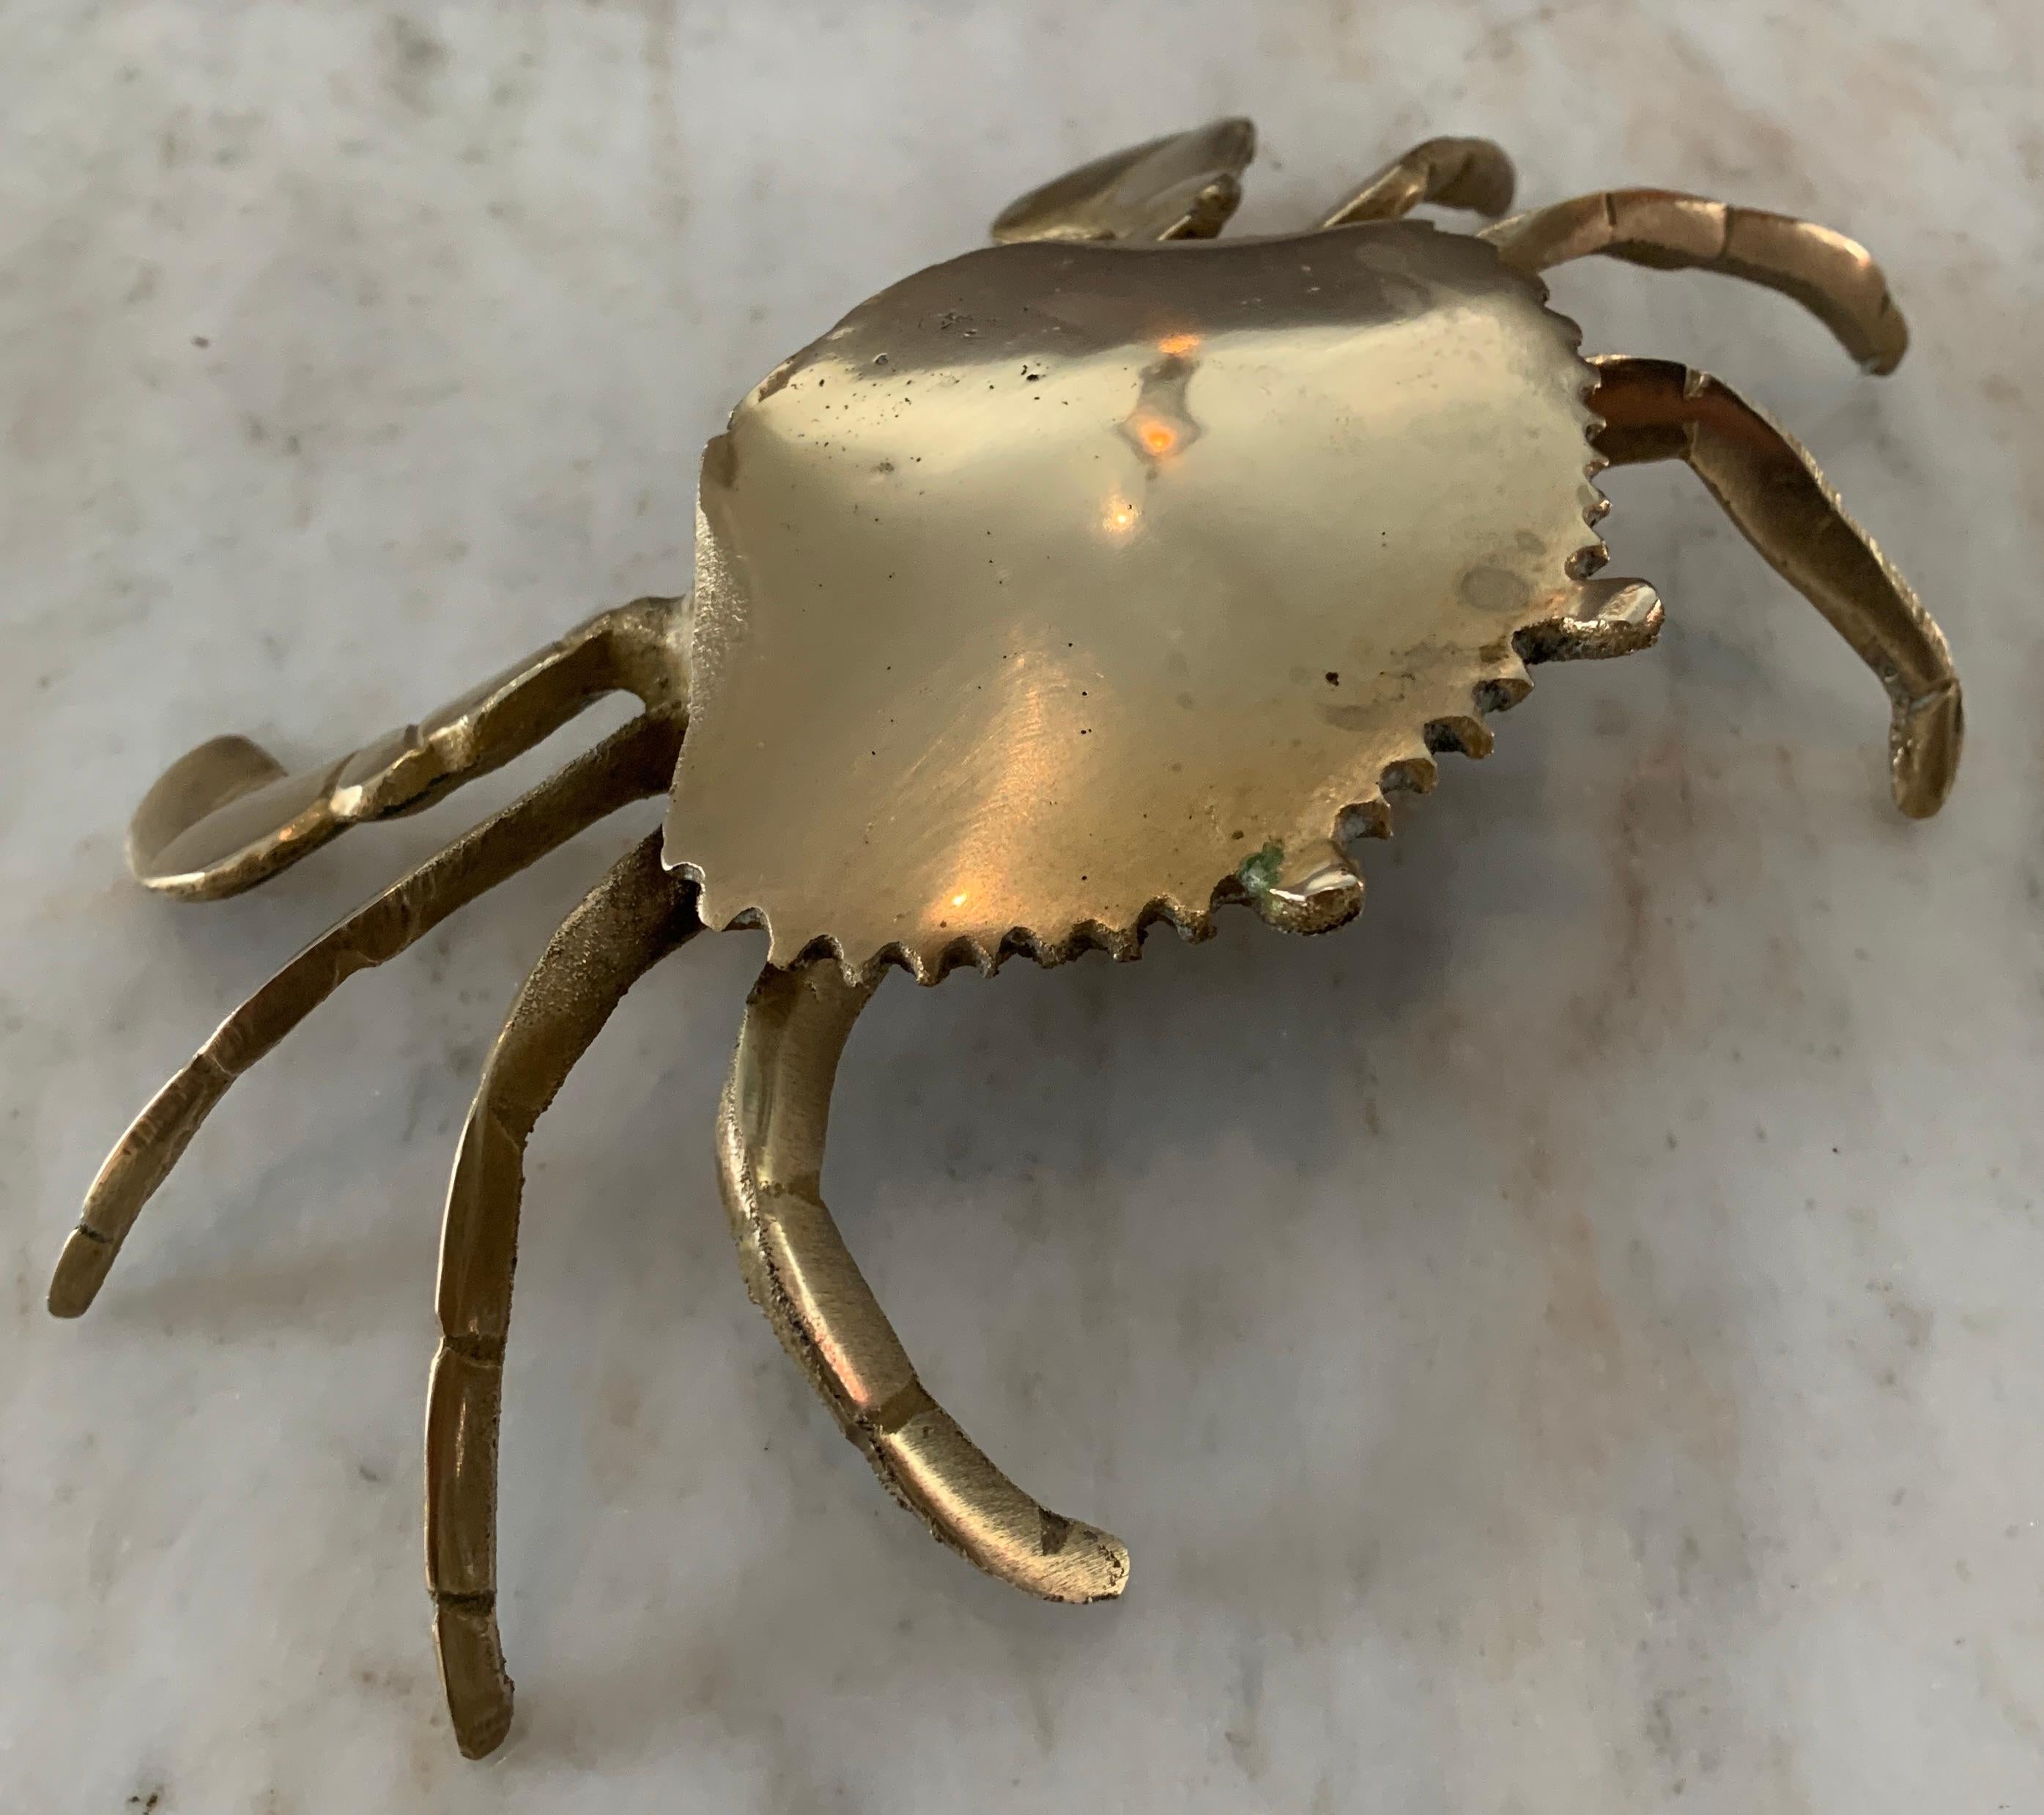 A wonderful decorative crab - perhaps for your Cancer friend! the perfect compliment to any desk for clips, or practical use as an ash tray for your 420 or occasional cigarette... simple and clean ready for the lake house or water lover too.